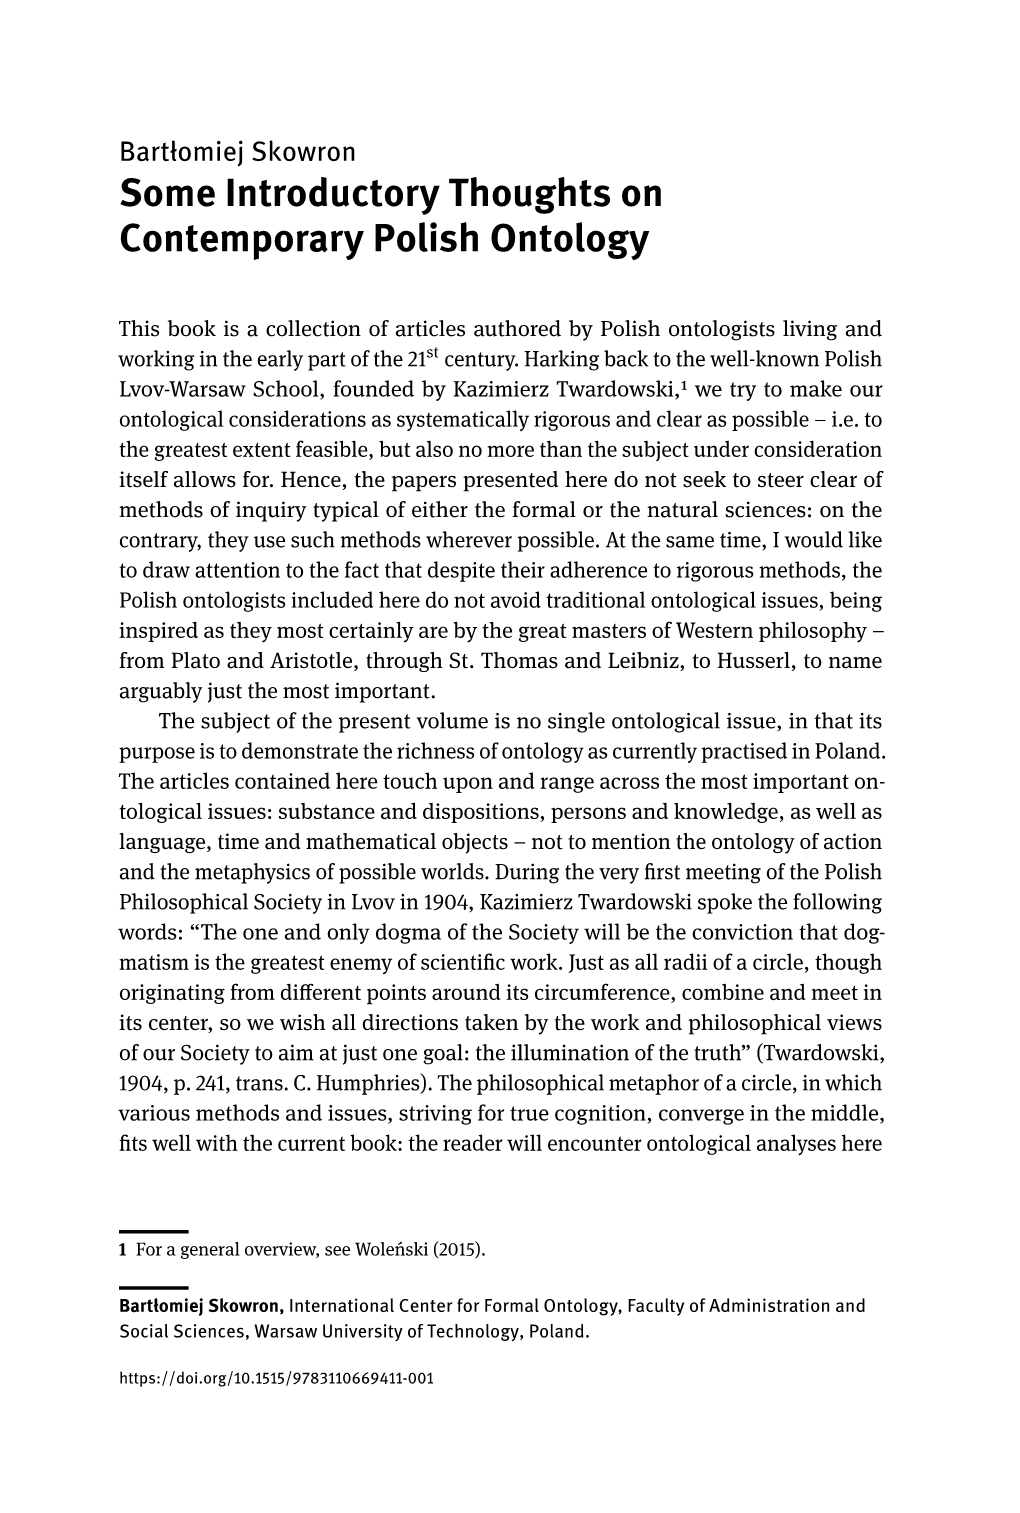 Some Introductory Thoughts on Contemporary Polish Ontology